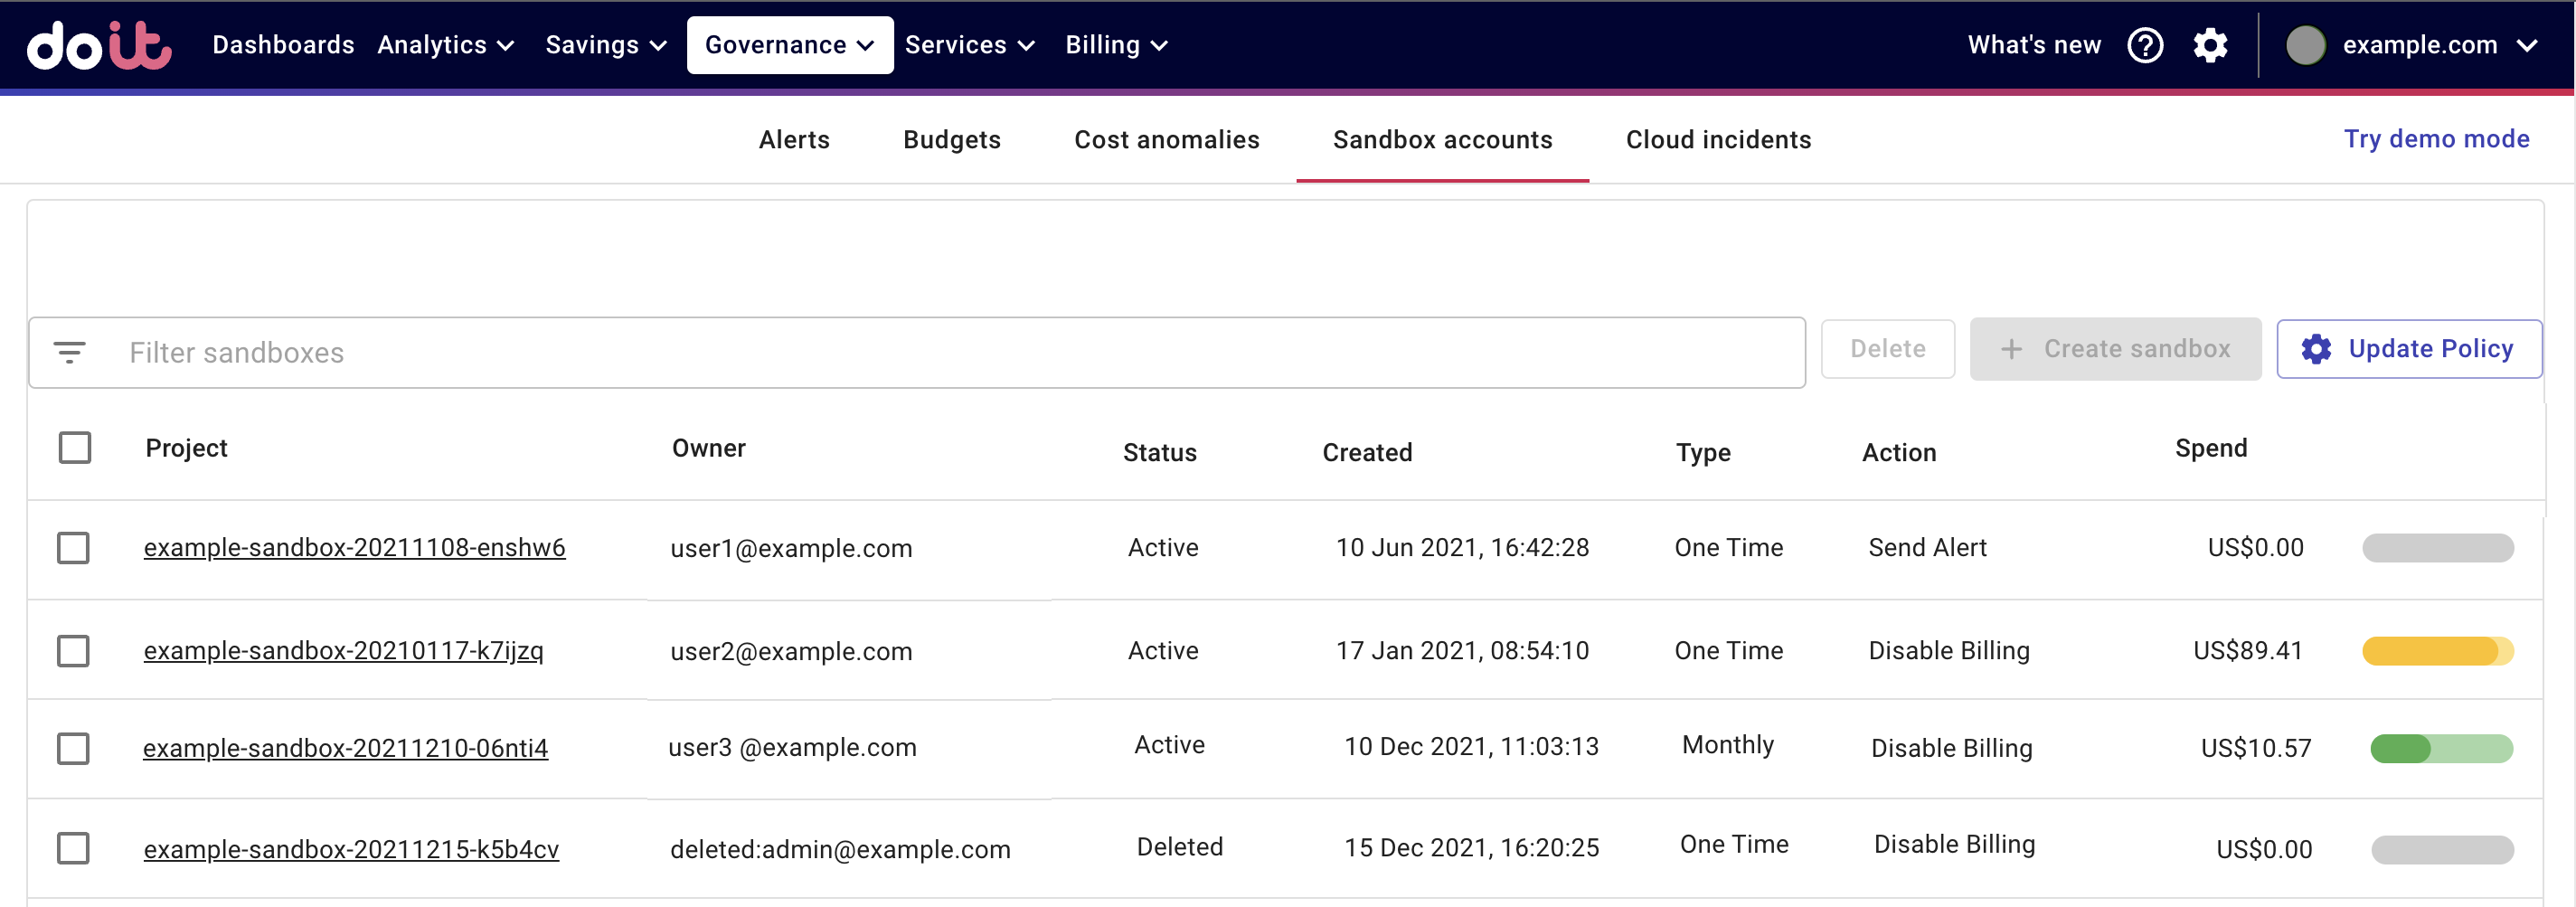 Sandbox accounts screen with multiple projects